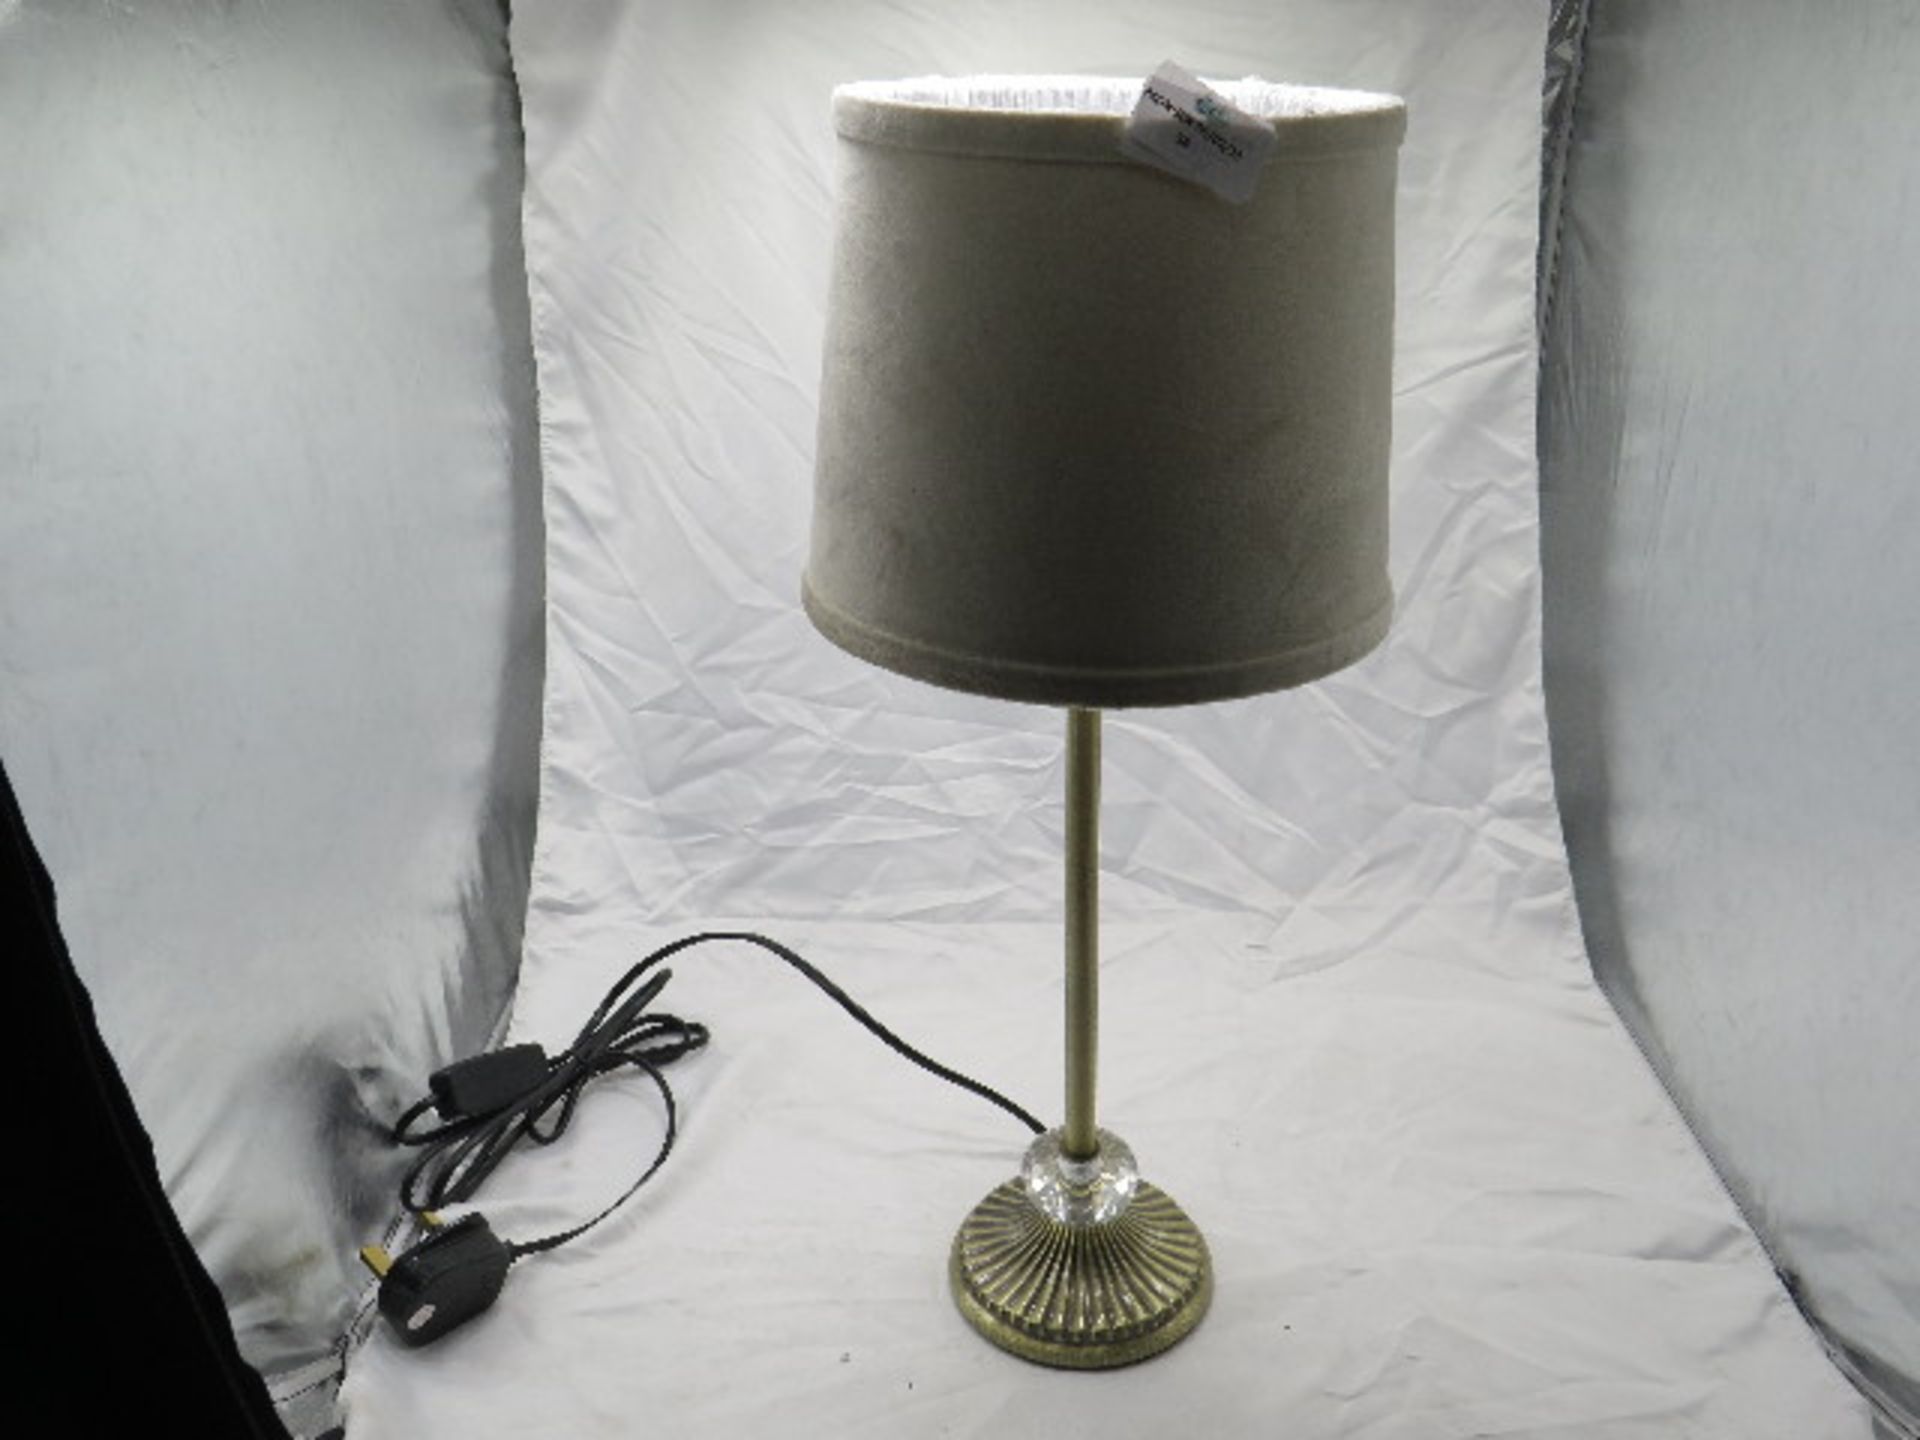 Table Lamp - ( See Image For Design ) - May Contain Marks Or Unseen Damages.